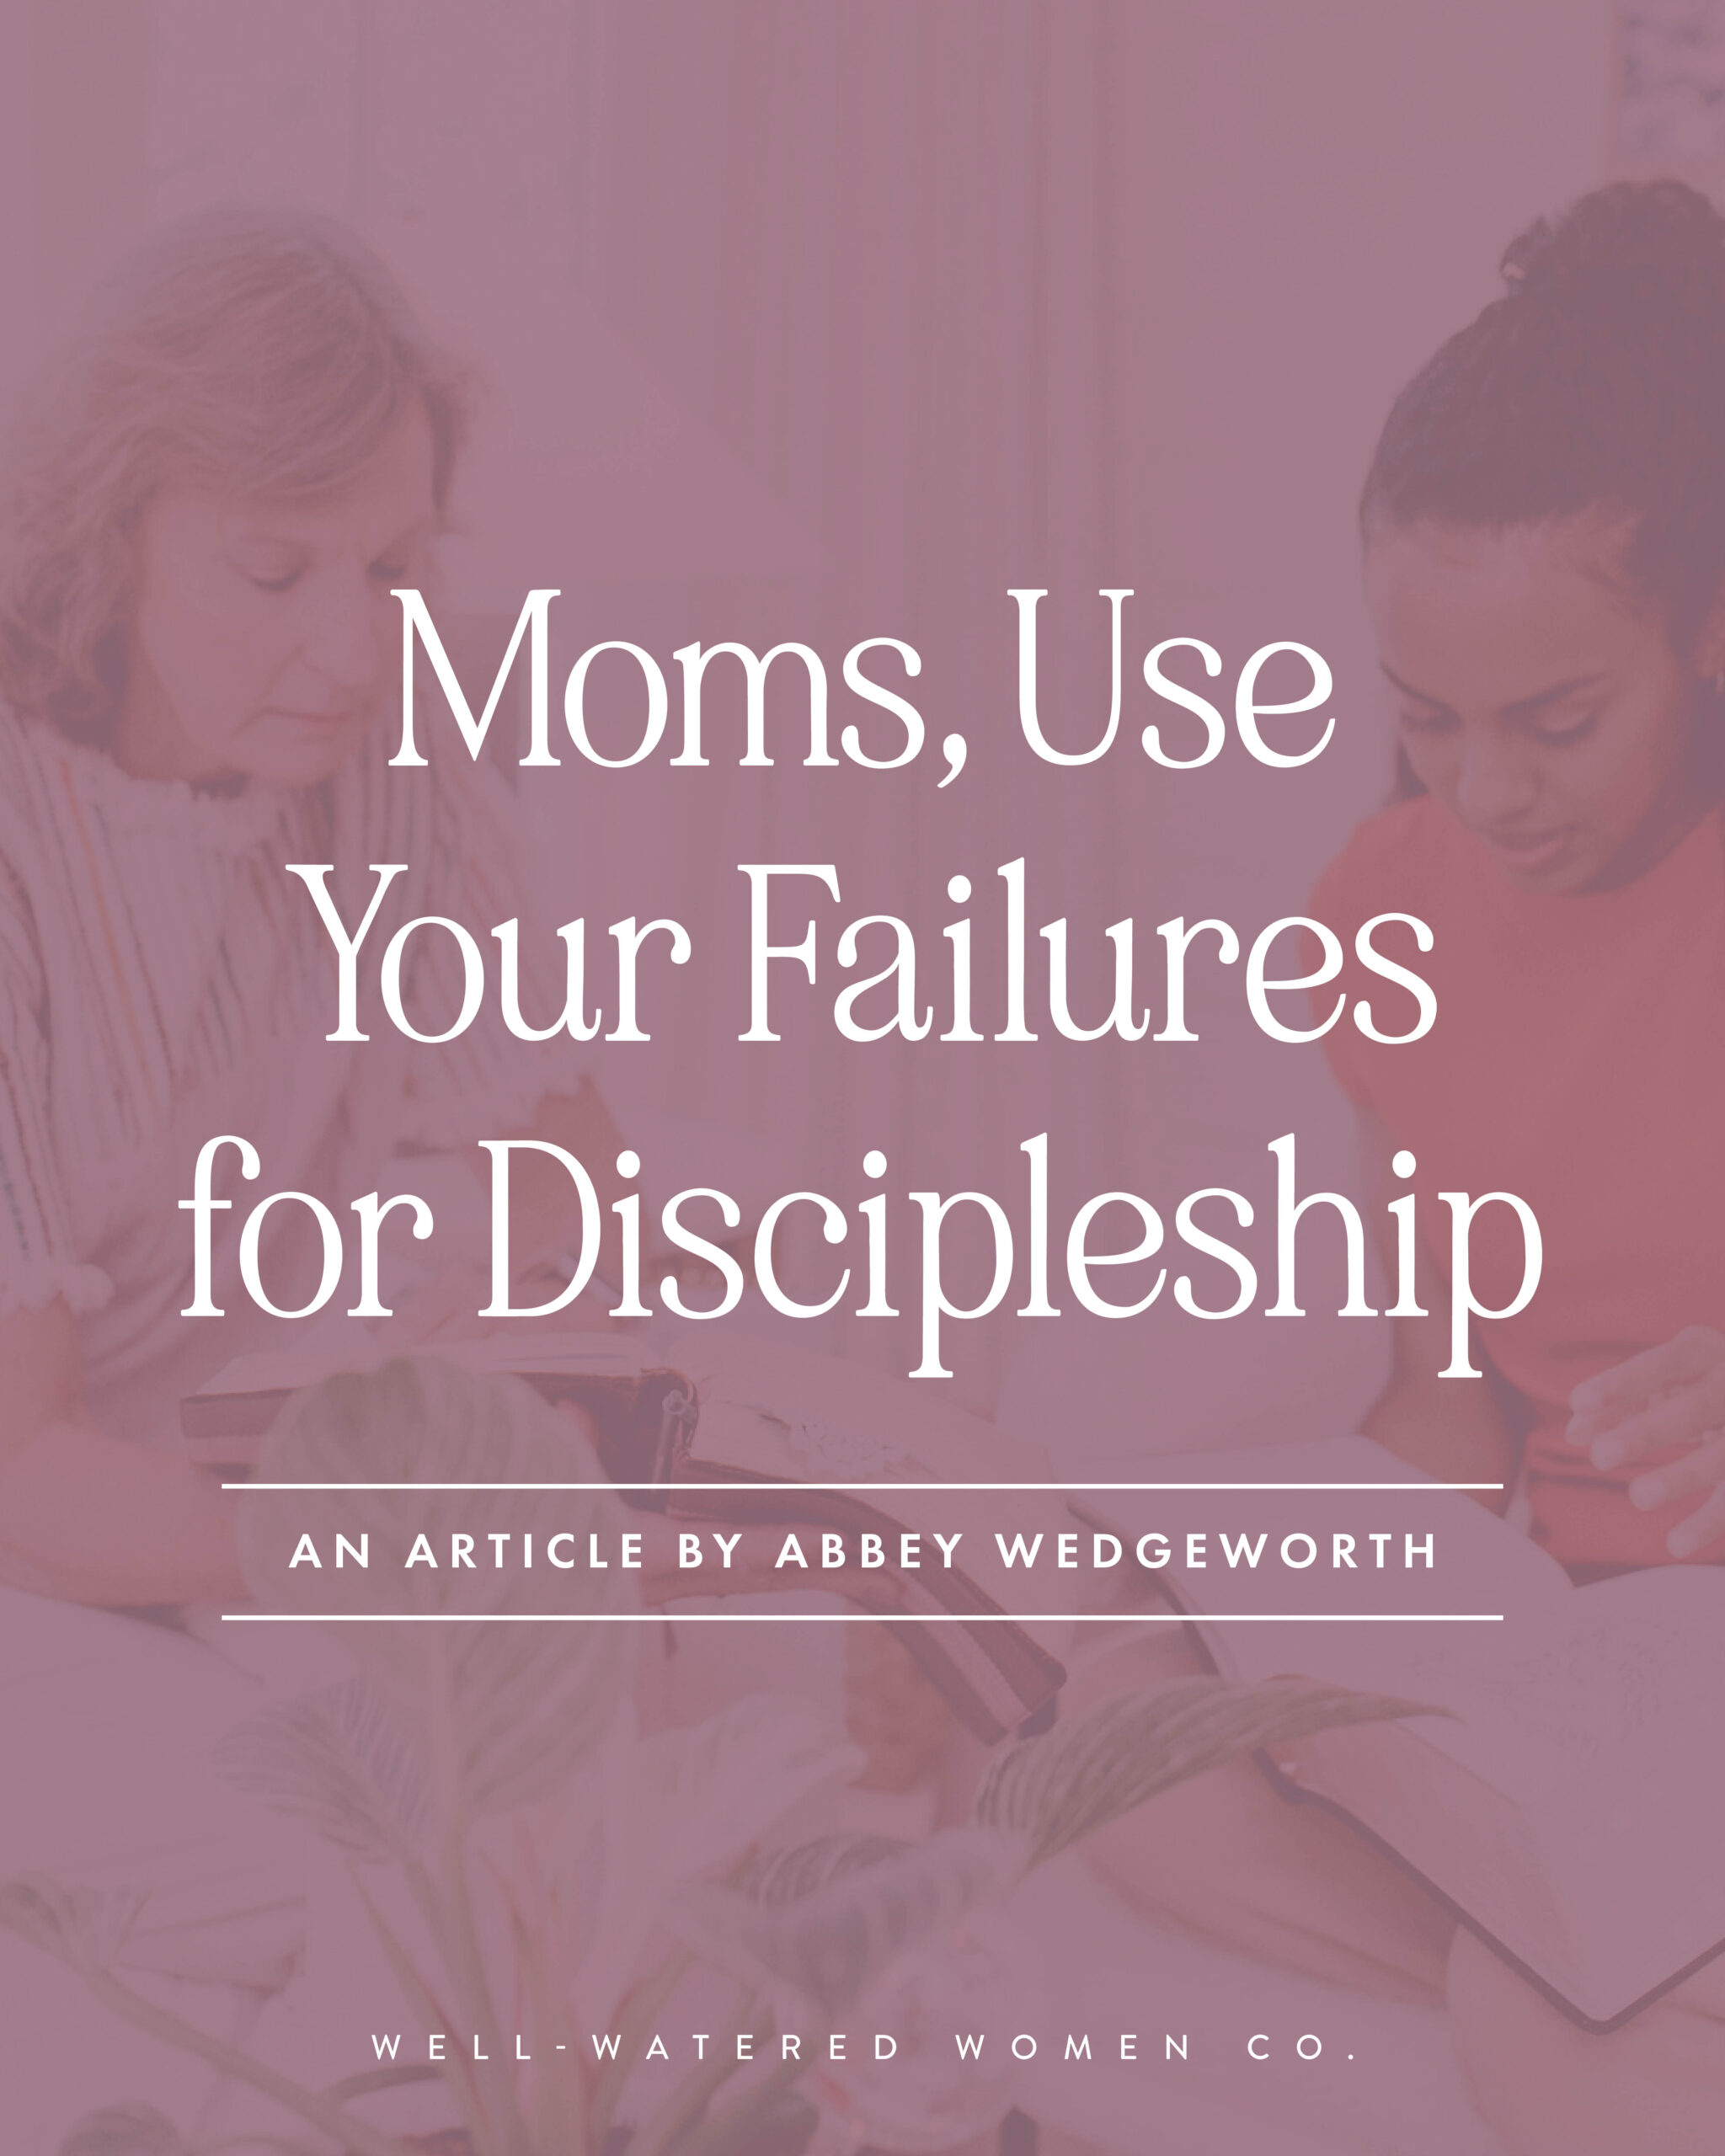 Moms, Use Your Failures for Discipleship - an article from Well-Watered Women